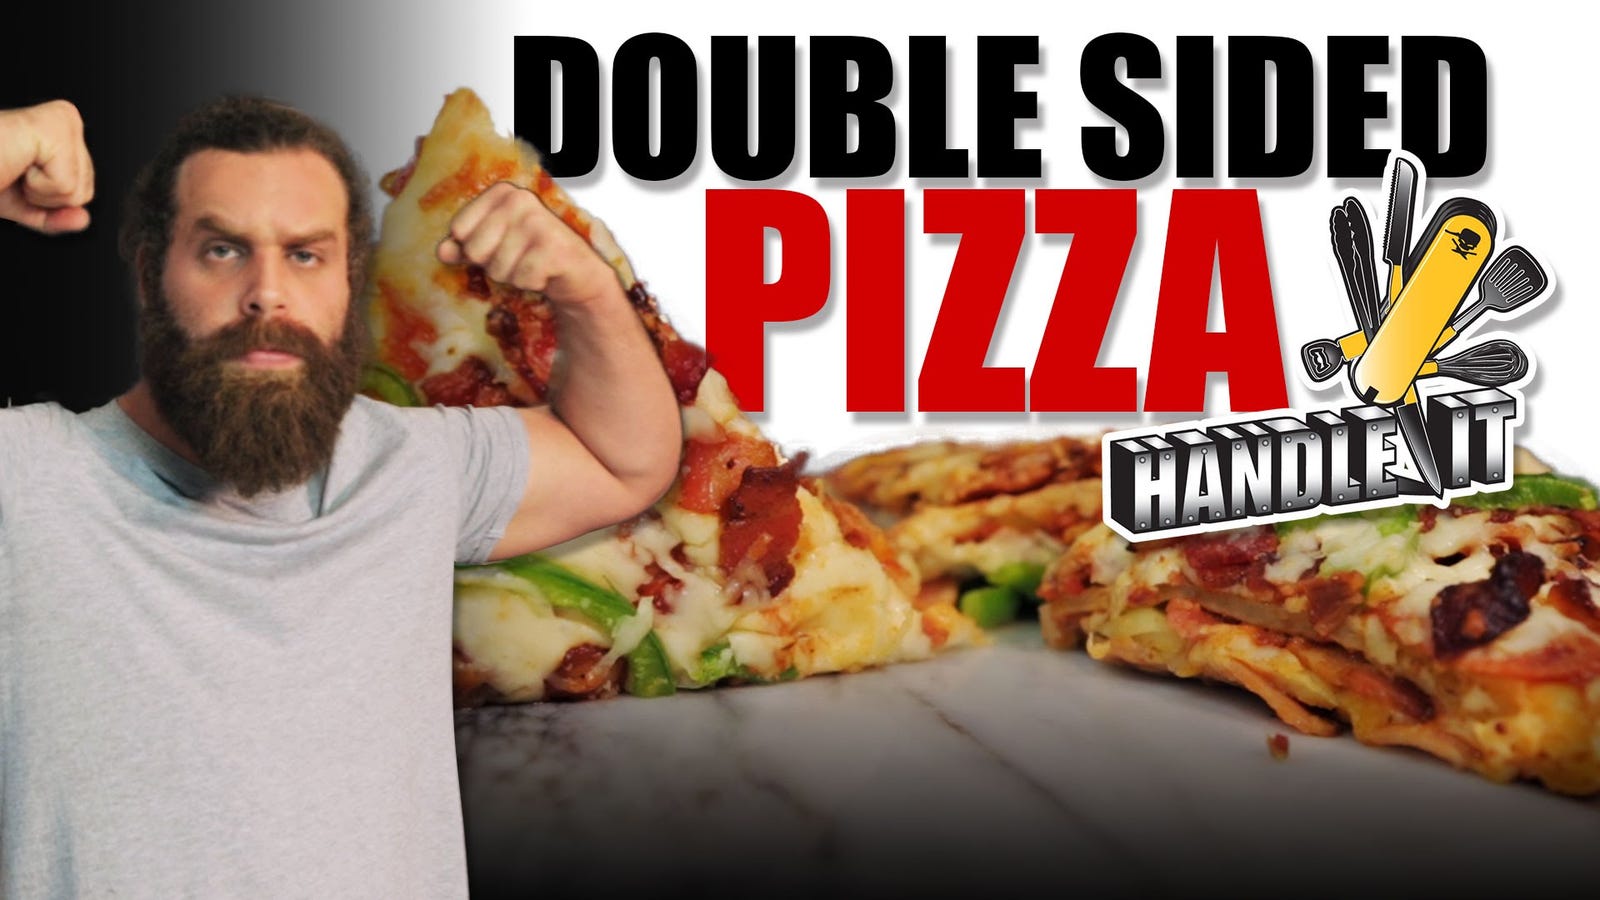 This Video Shows You How to Bake the Legendary Double-Sided Pizza